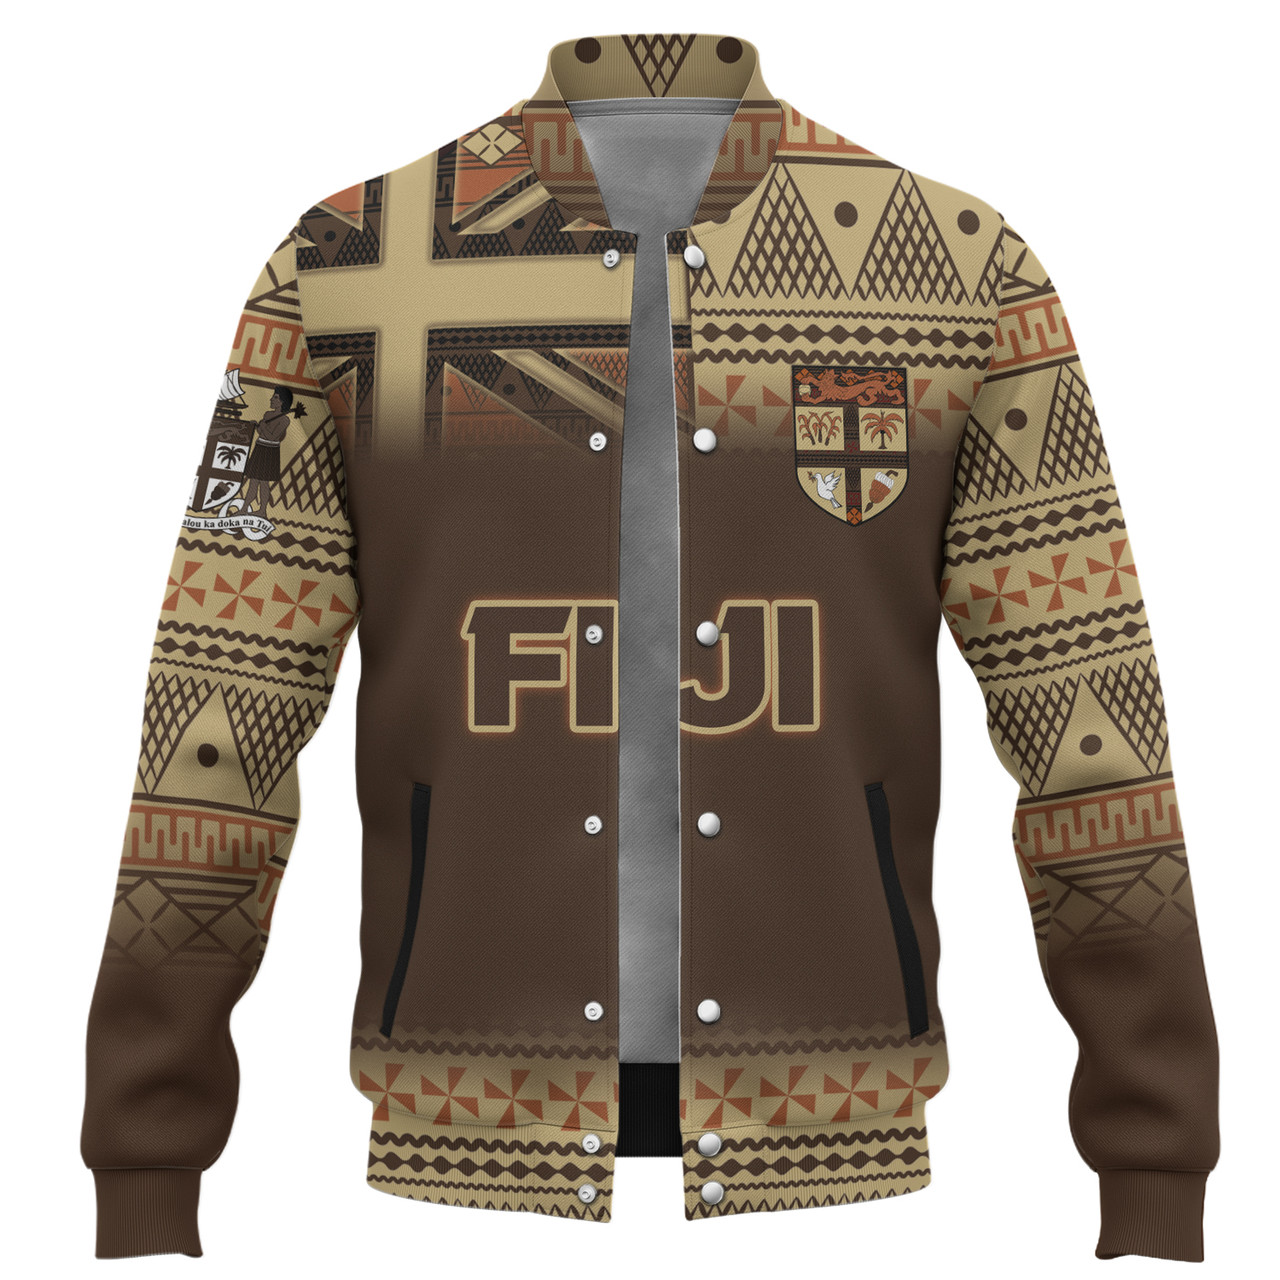 Fiji Baseball Jacket Flag Color With Traditional Patterns Ver 2